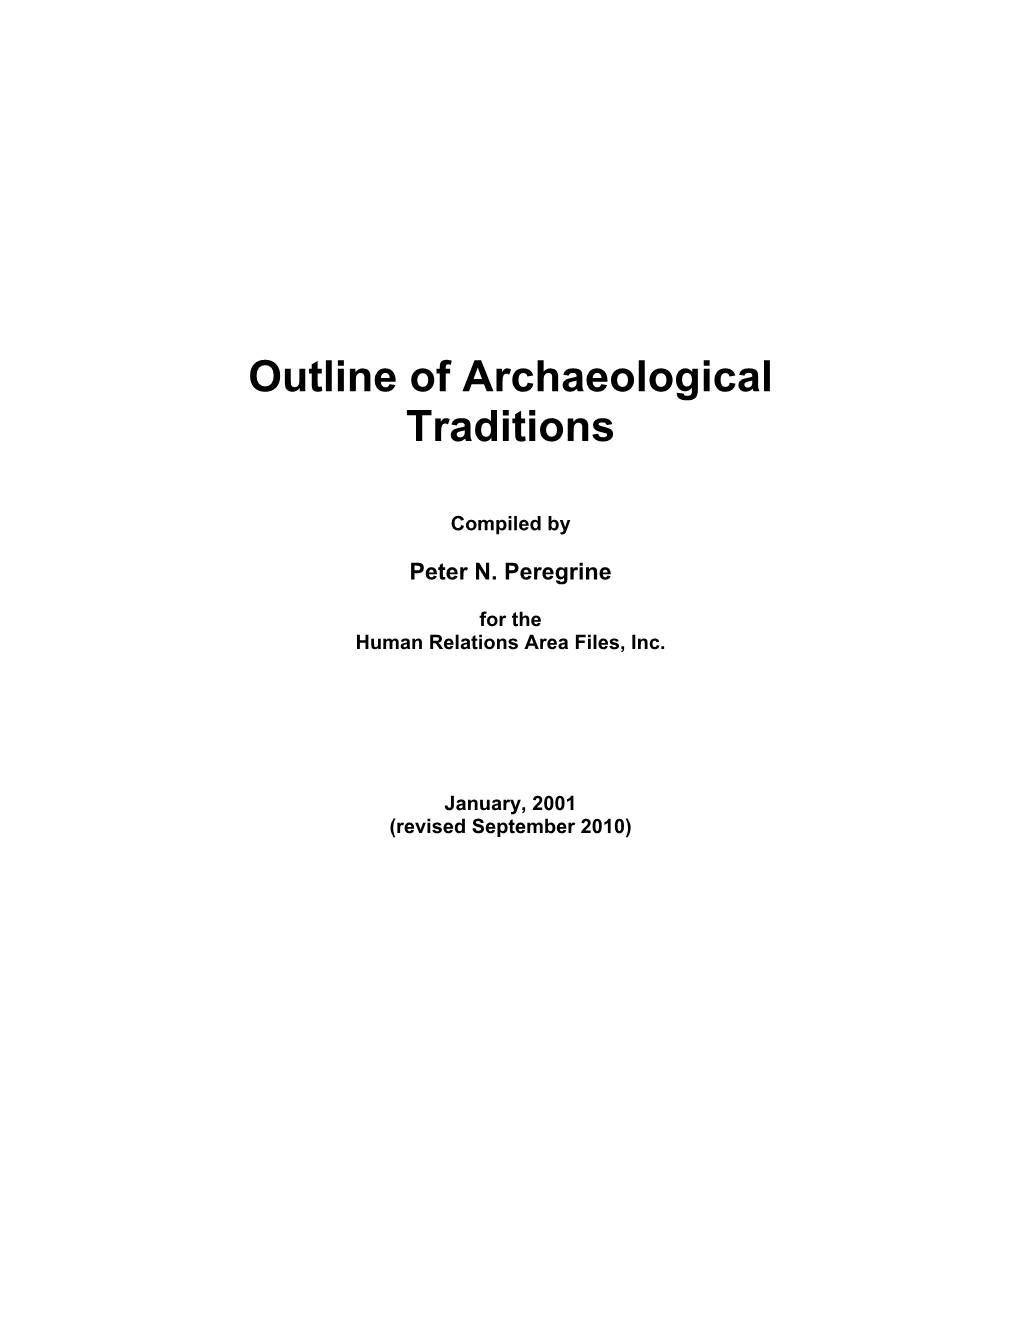 Outline of Archaeological Traditions